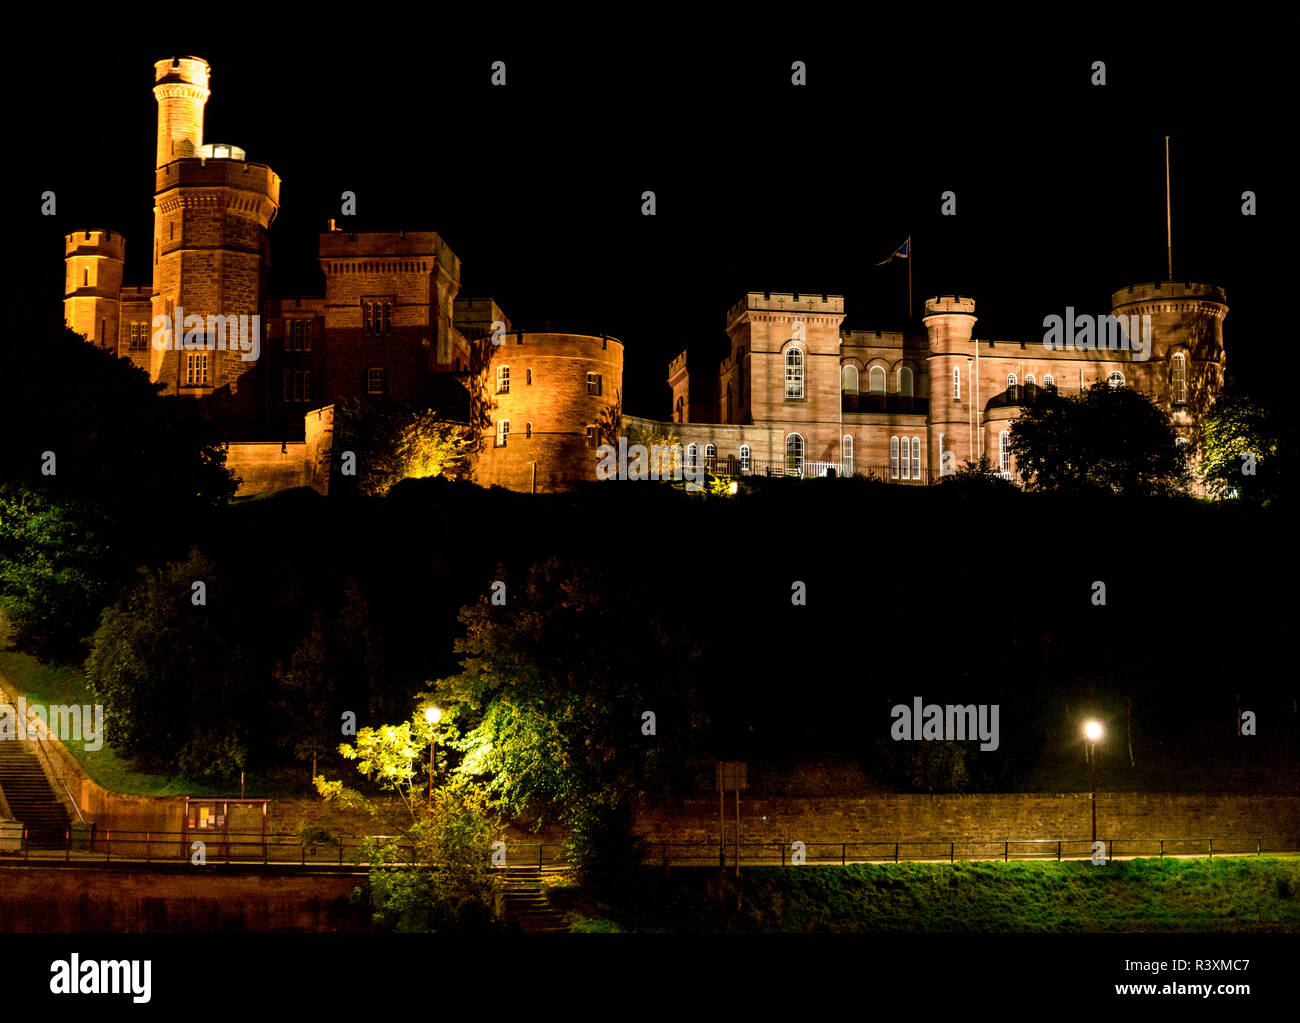 A night view of illuminated Inverness Castle, northern Scotland. Shot taken from the other side of river Ness. Stock Photo